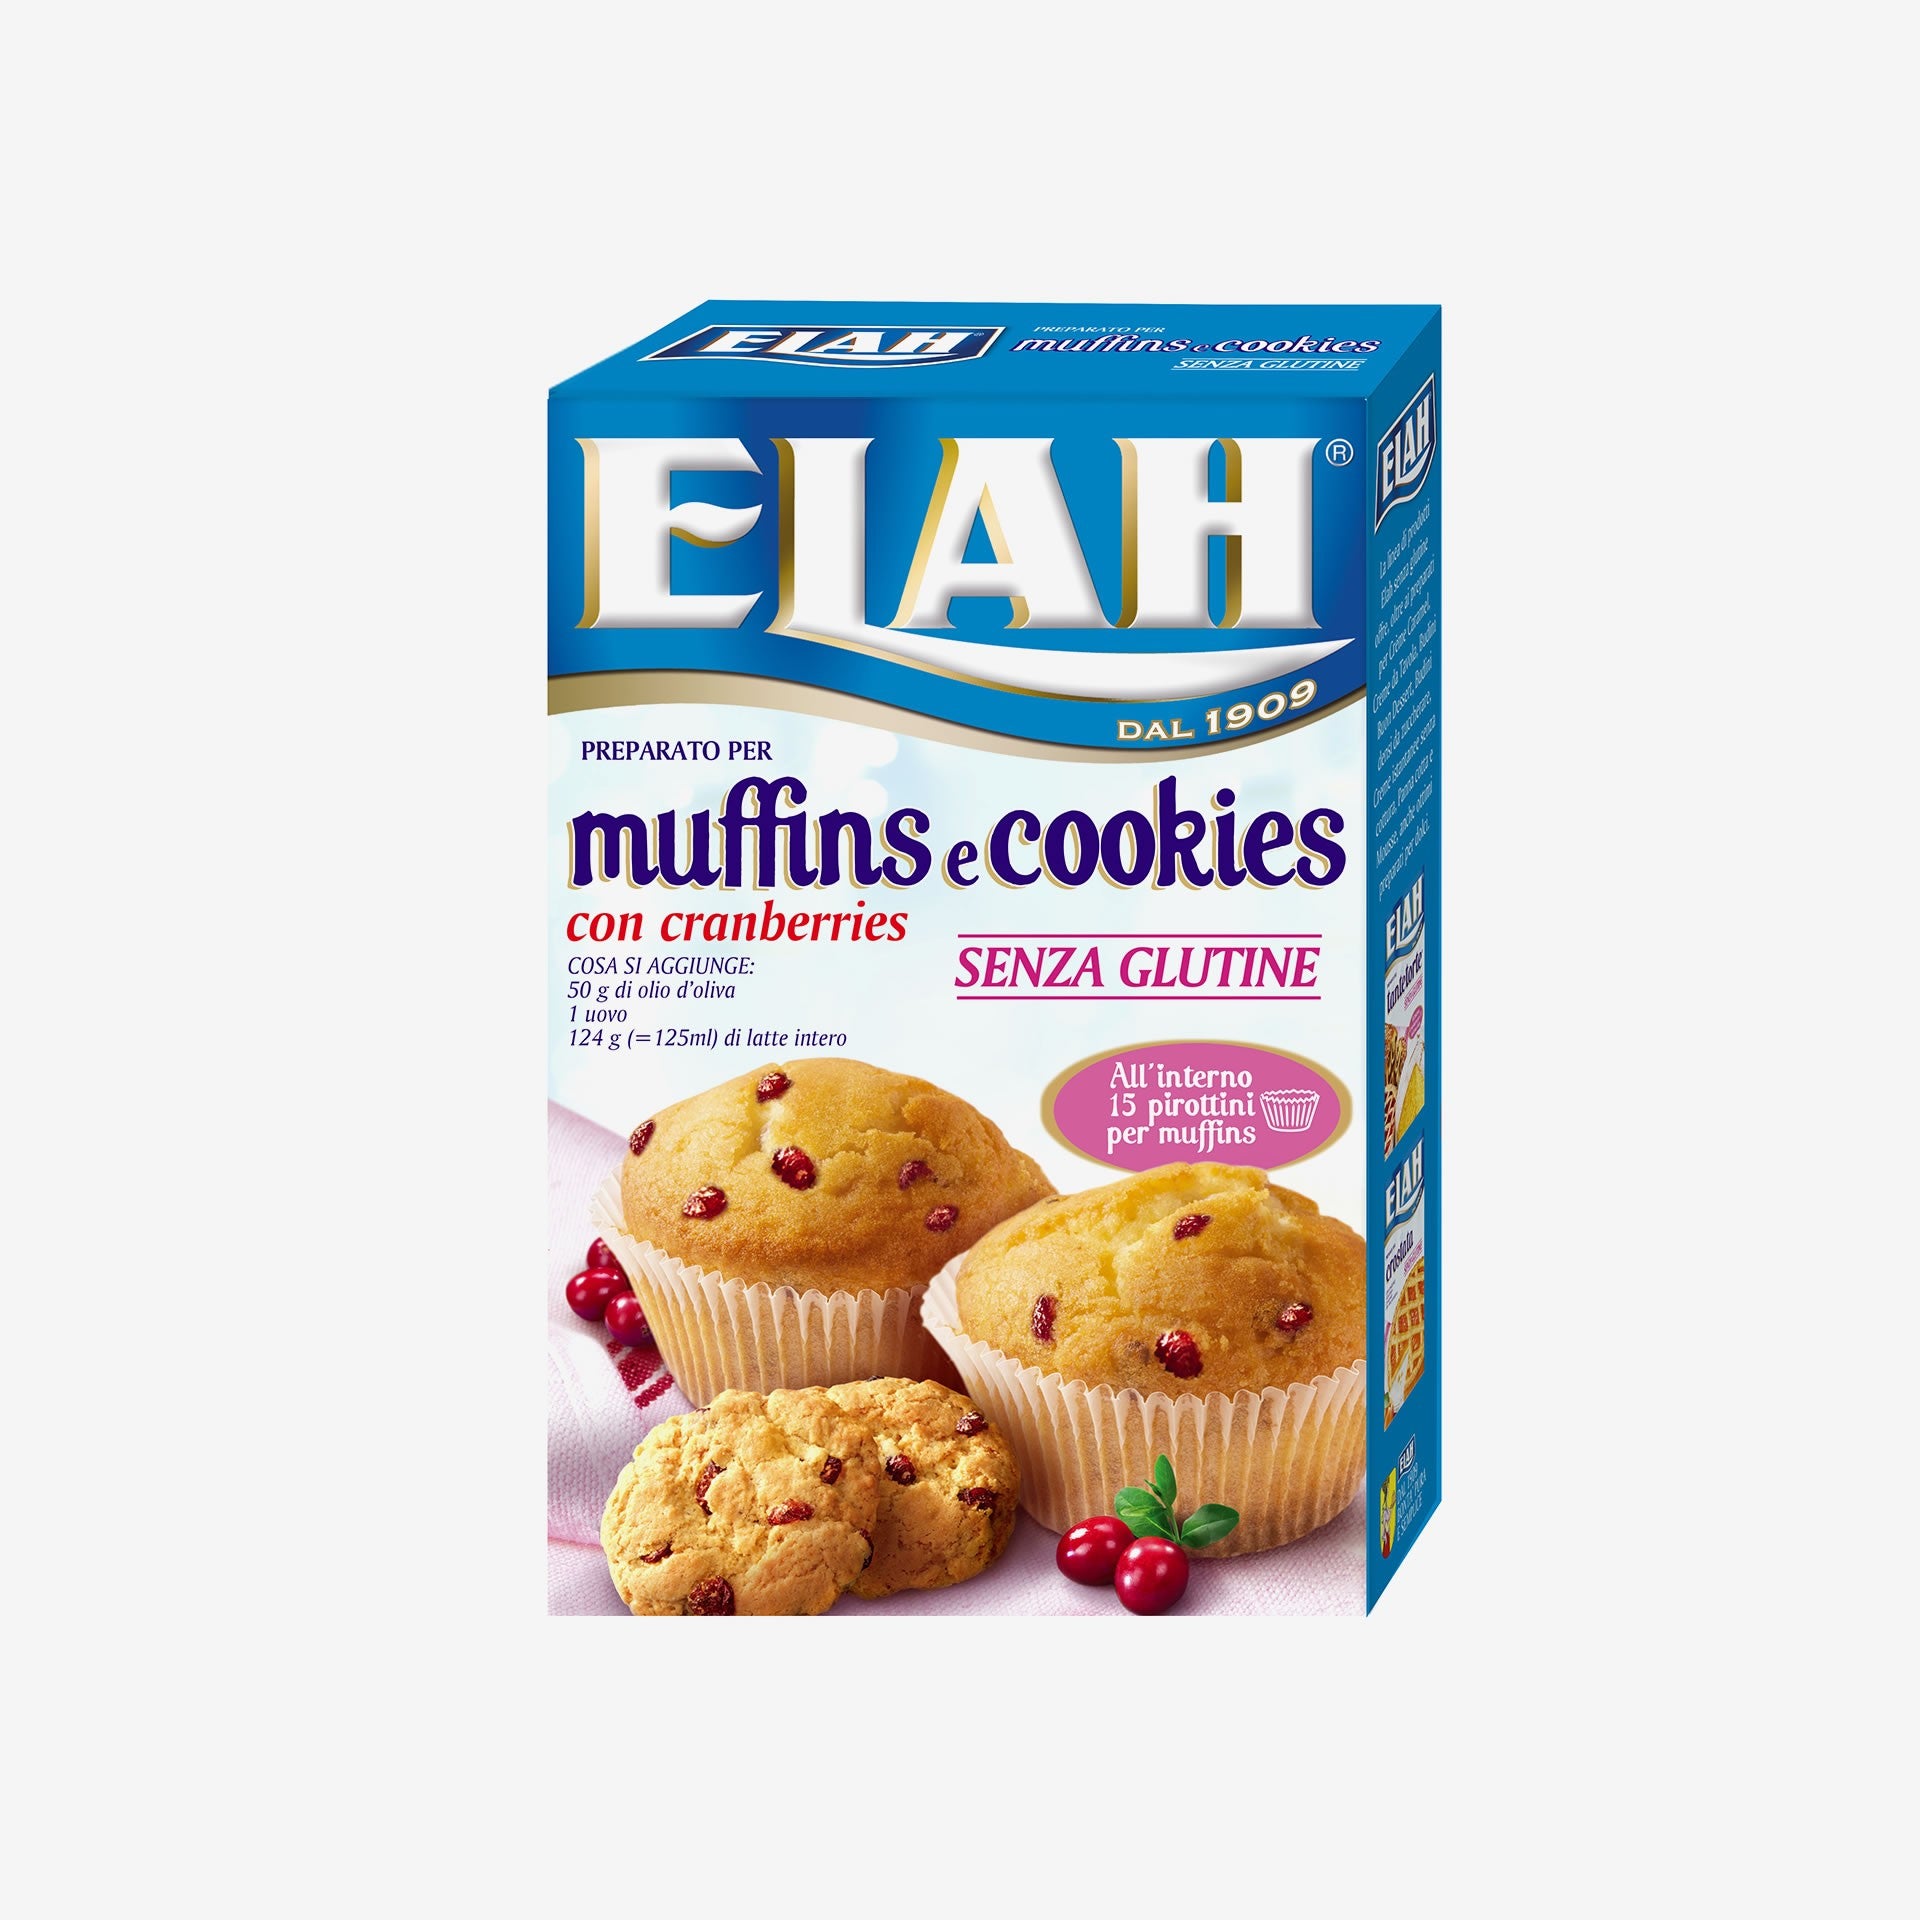 Gluten-free muffins and cookies case